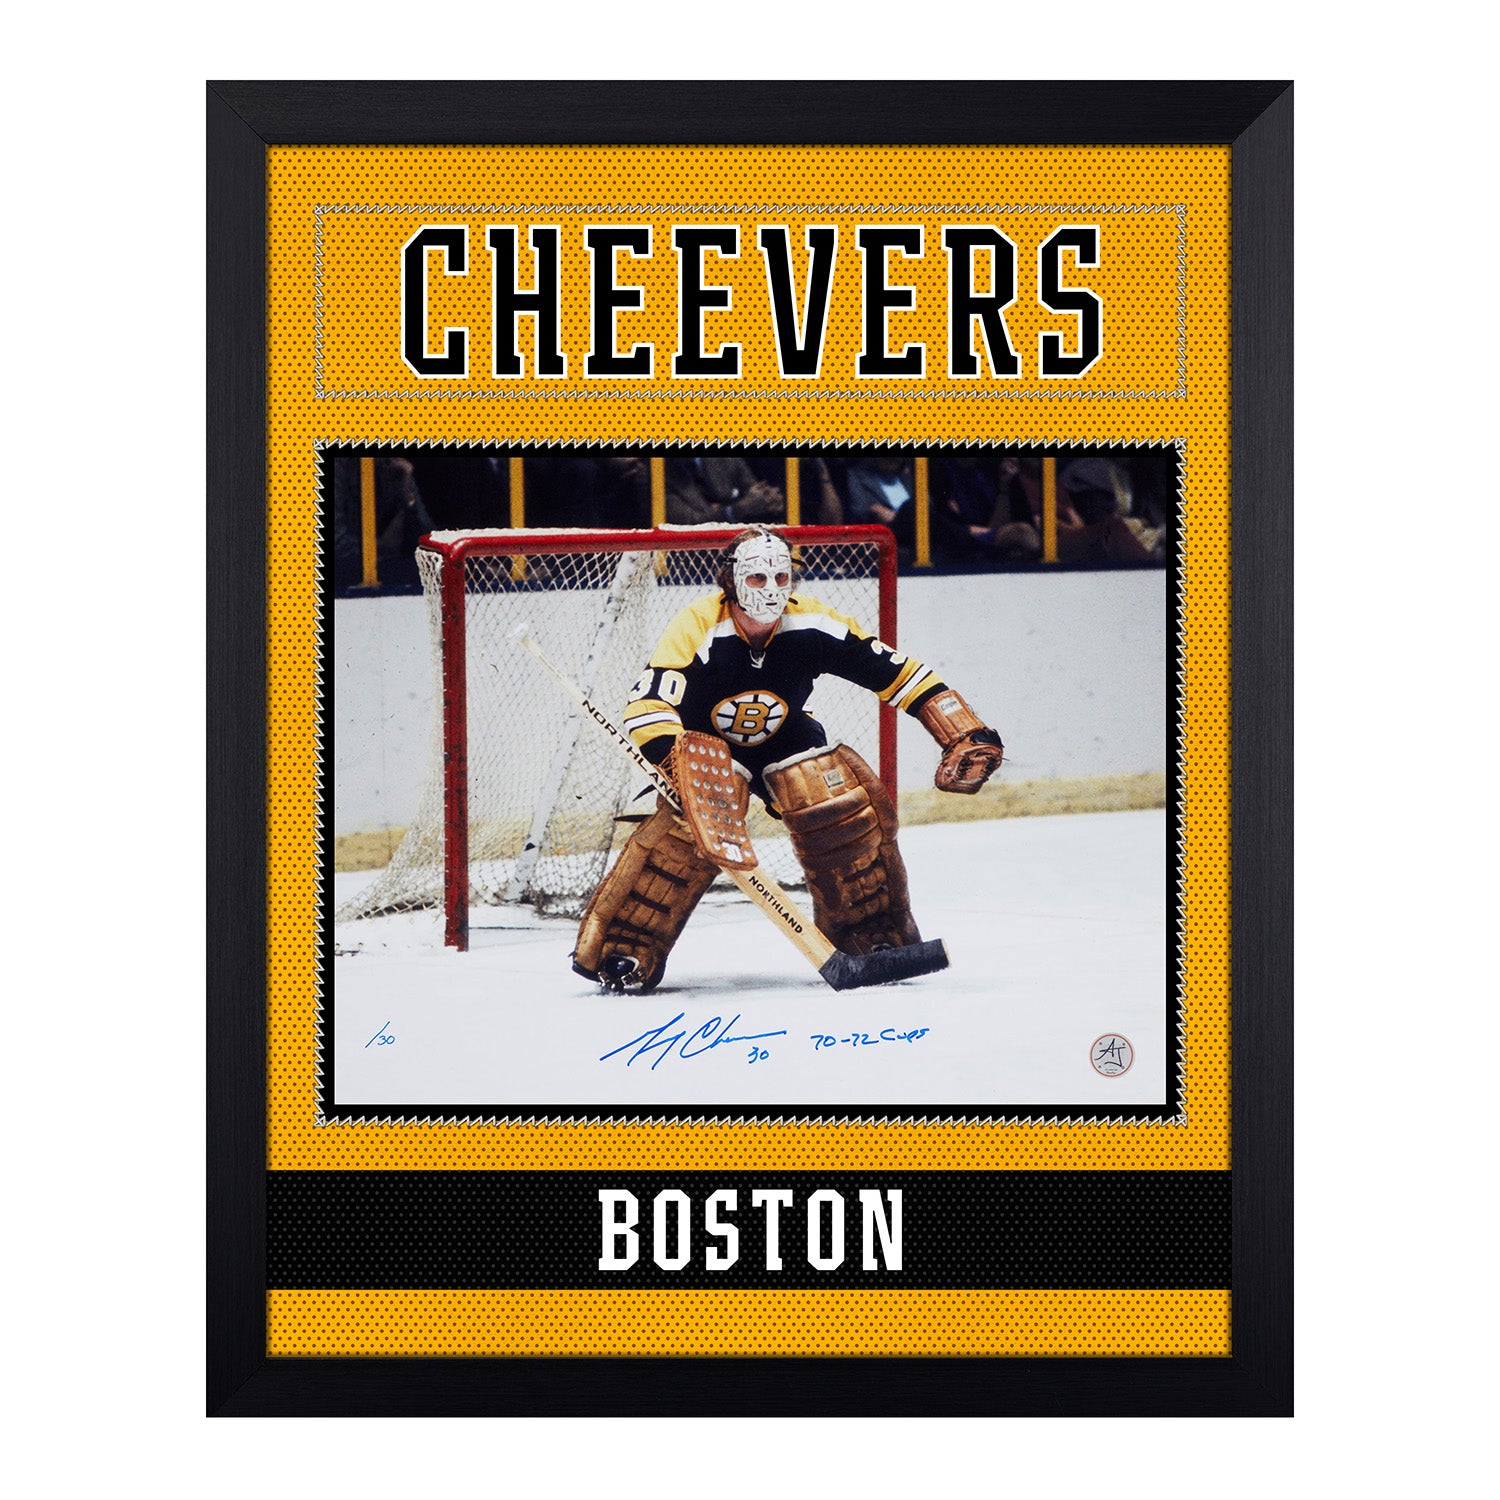 Gerry Cheevers Signed Boston Bruins Uniform Graphic 19x23 Frame